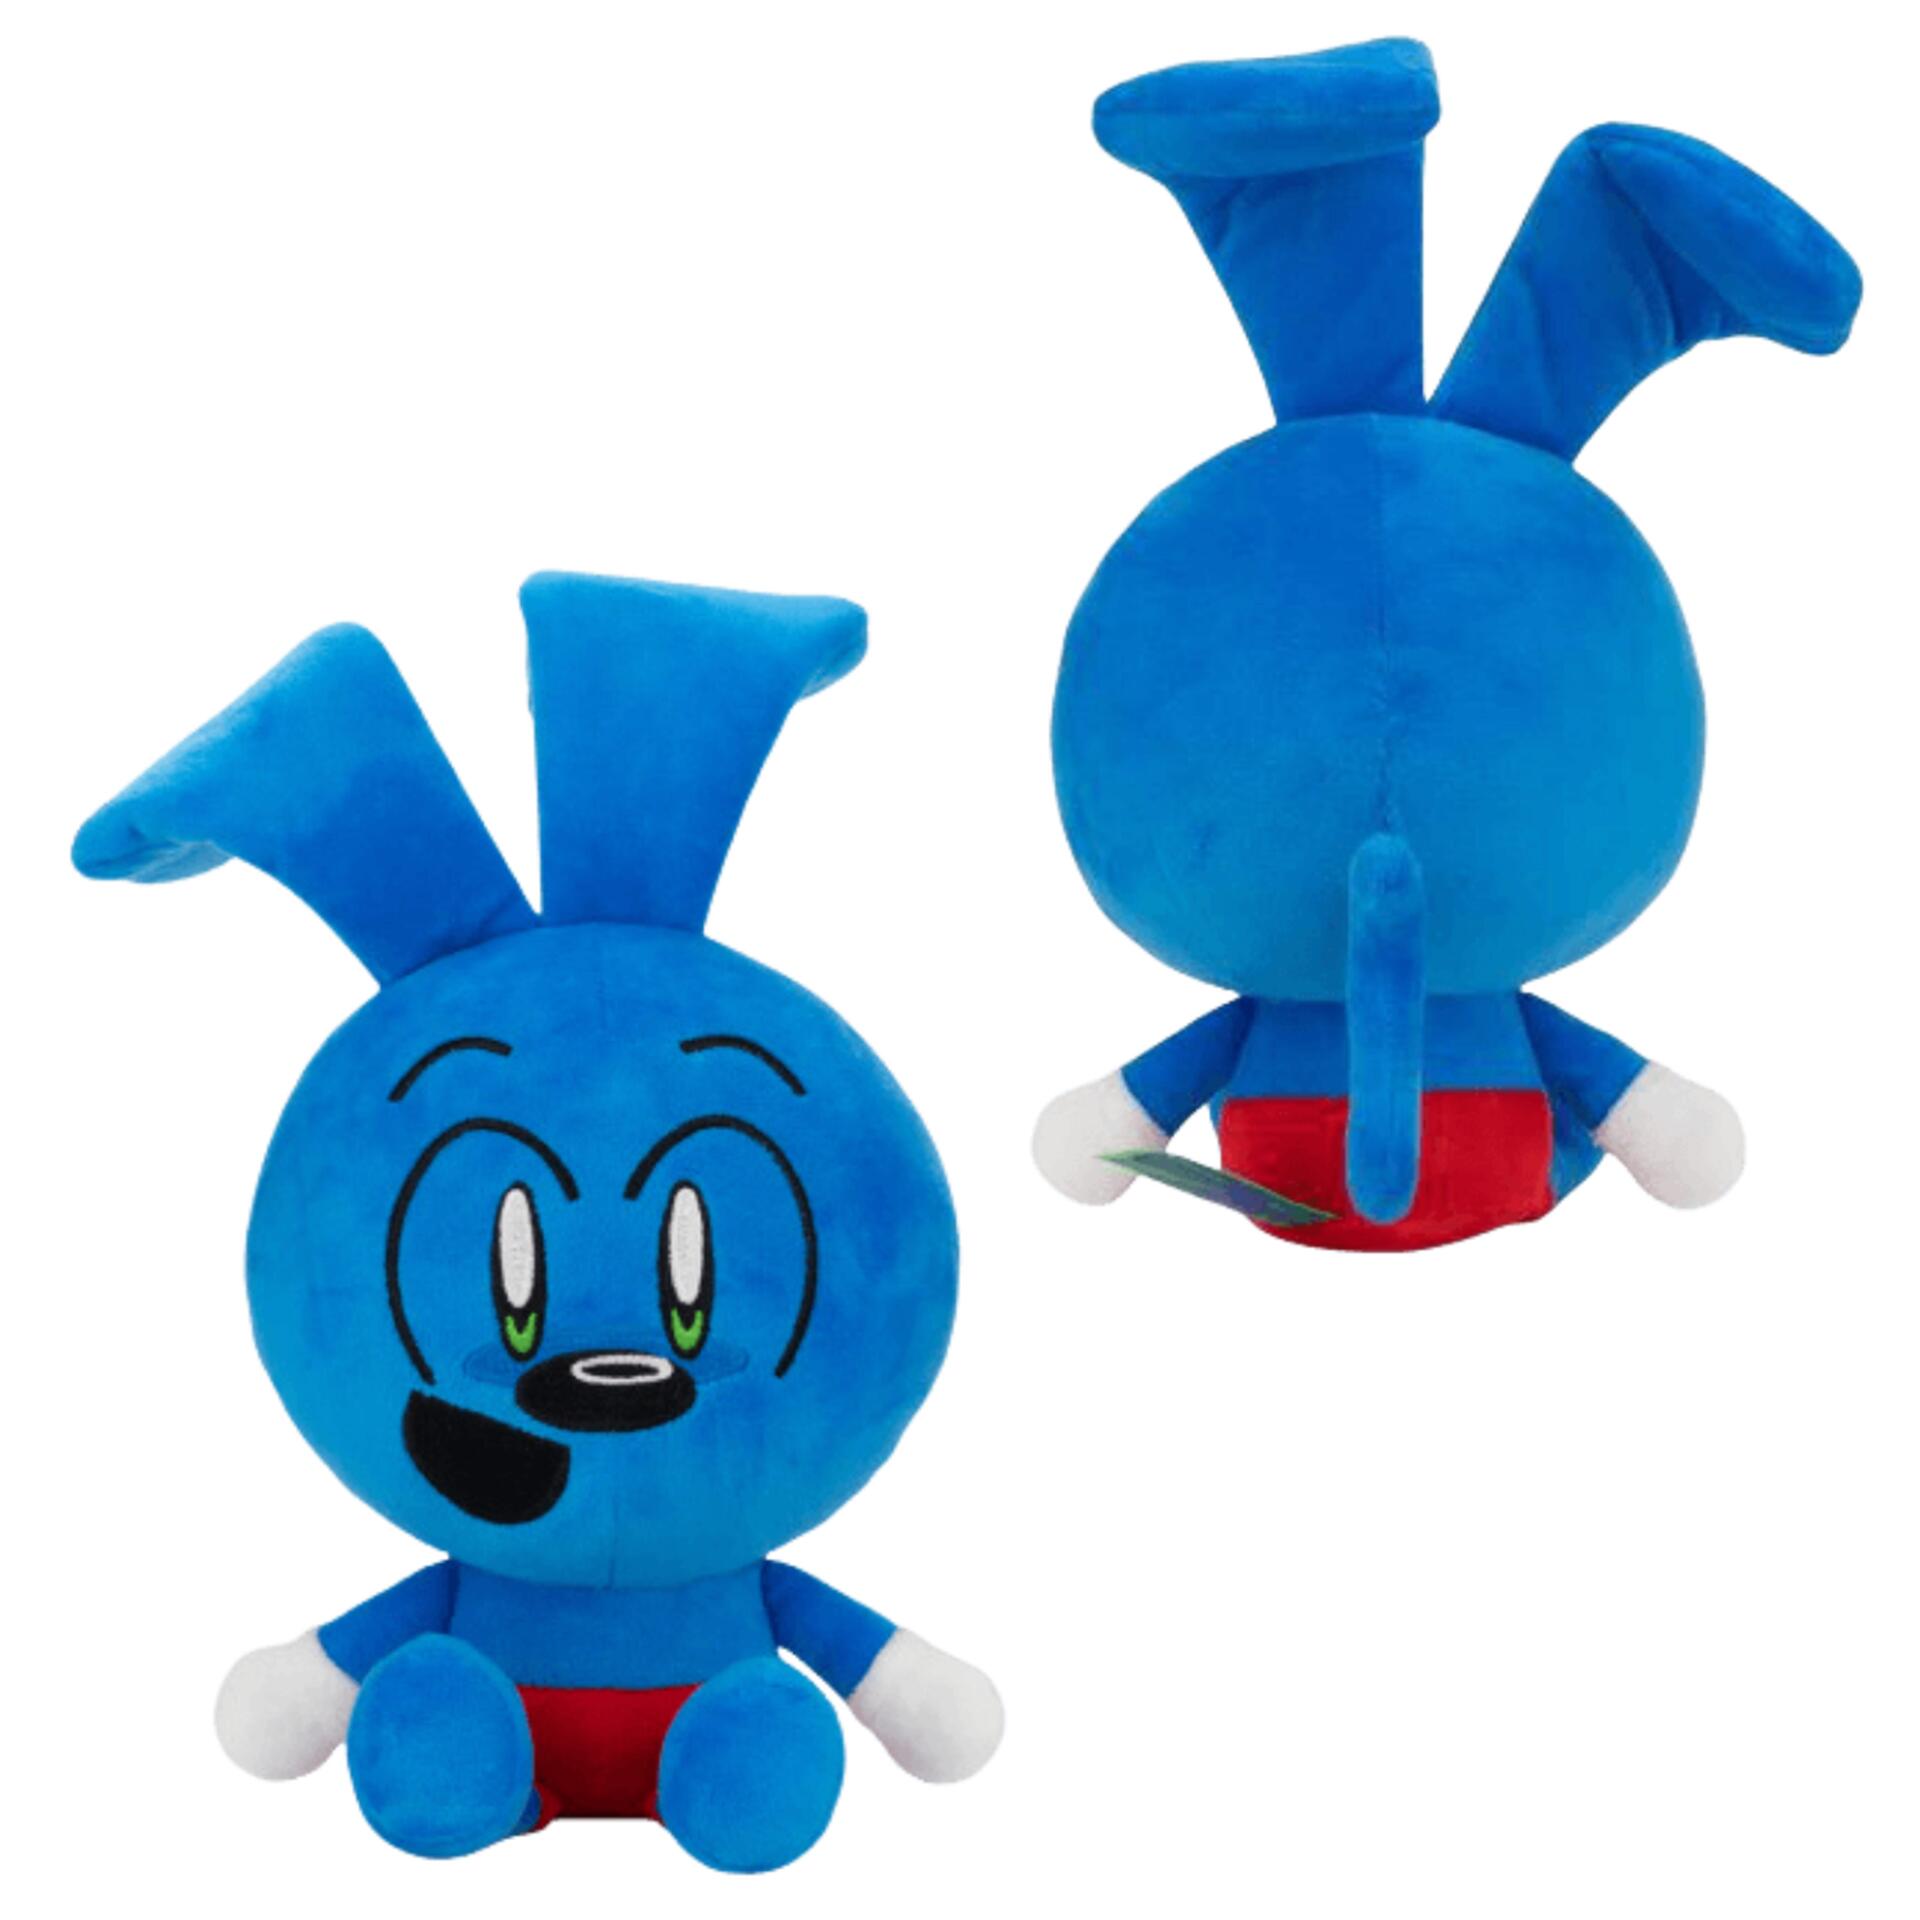 Plush Toys,2022 New Bunzo Bunny Plush for Game Fans Gift,Soft Stuffed  Pillow Doll for Kids and Adults.(Bunzo Bunny)